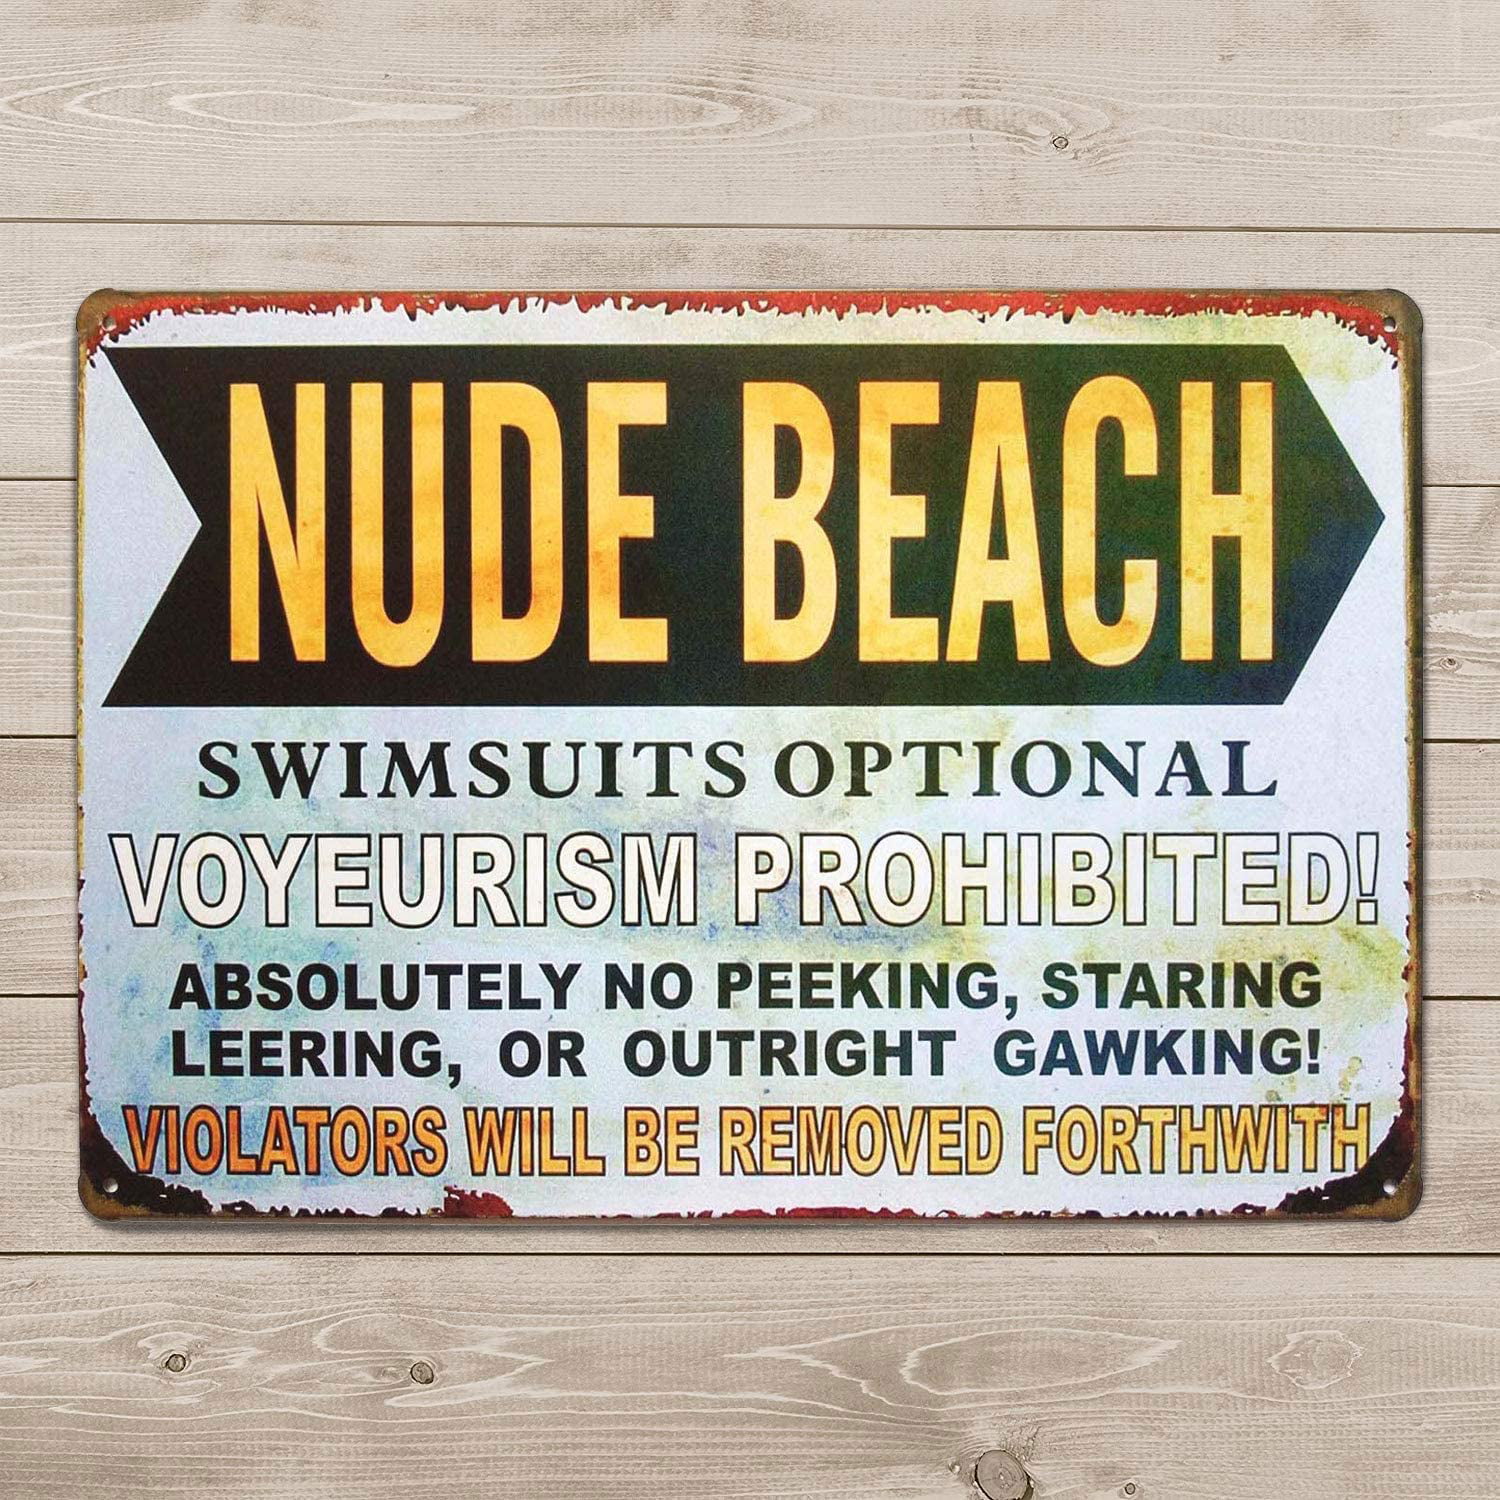 Nude Beach Swimsuits Optional Voyeurism Prohibited Metal Tin Sign Vintage Plaque Home Wall Decor, 8x12 Inches pic